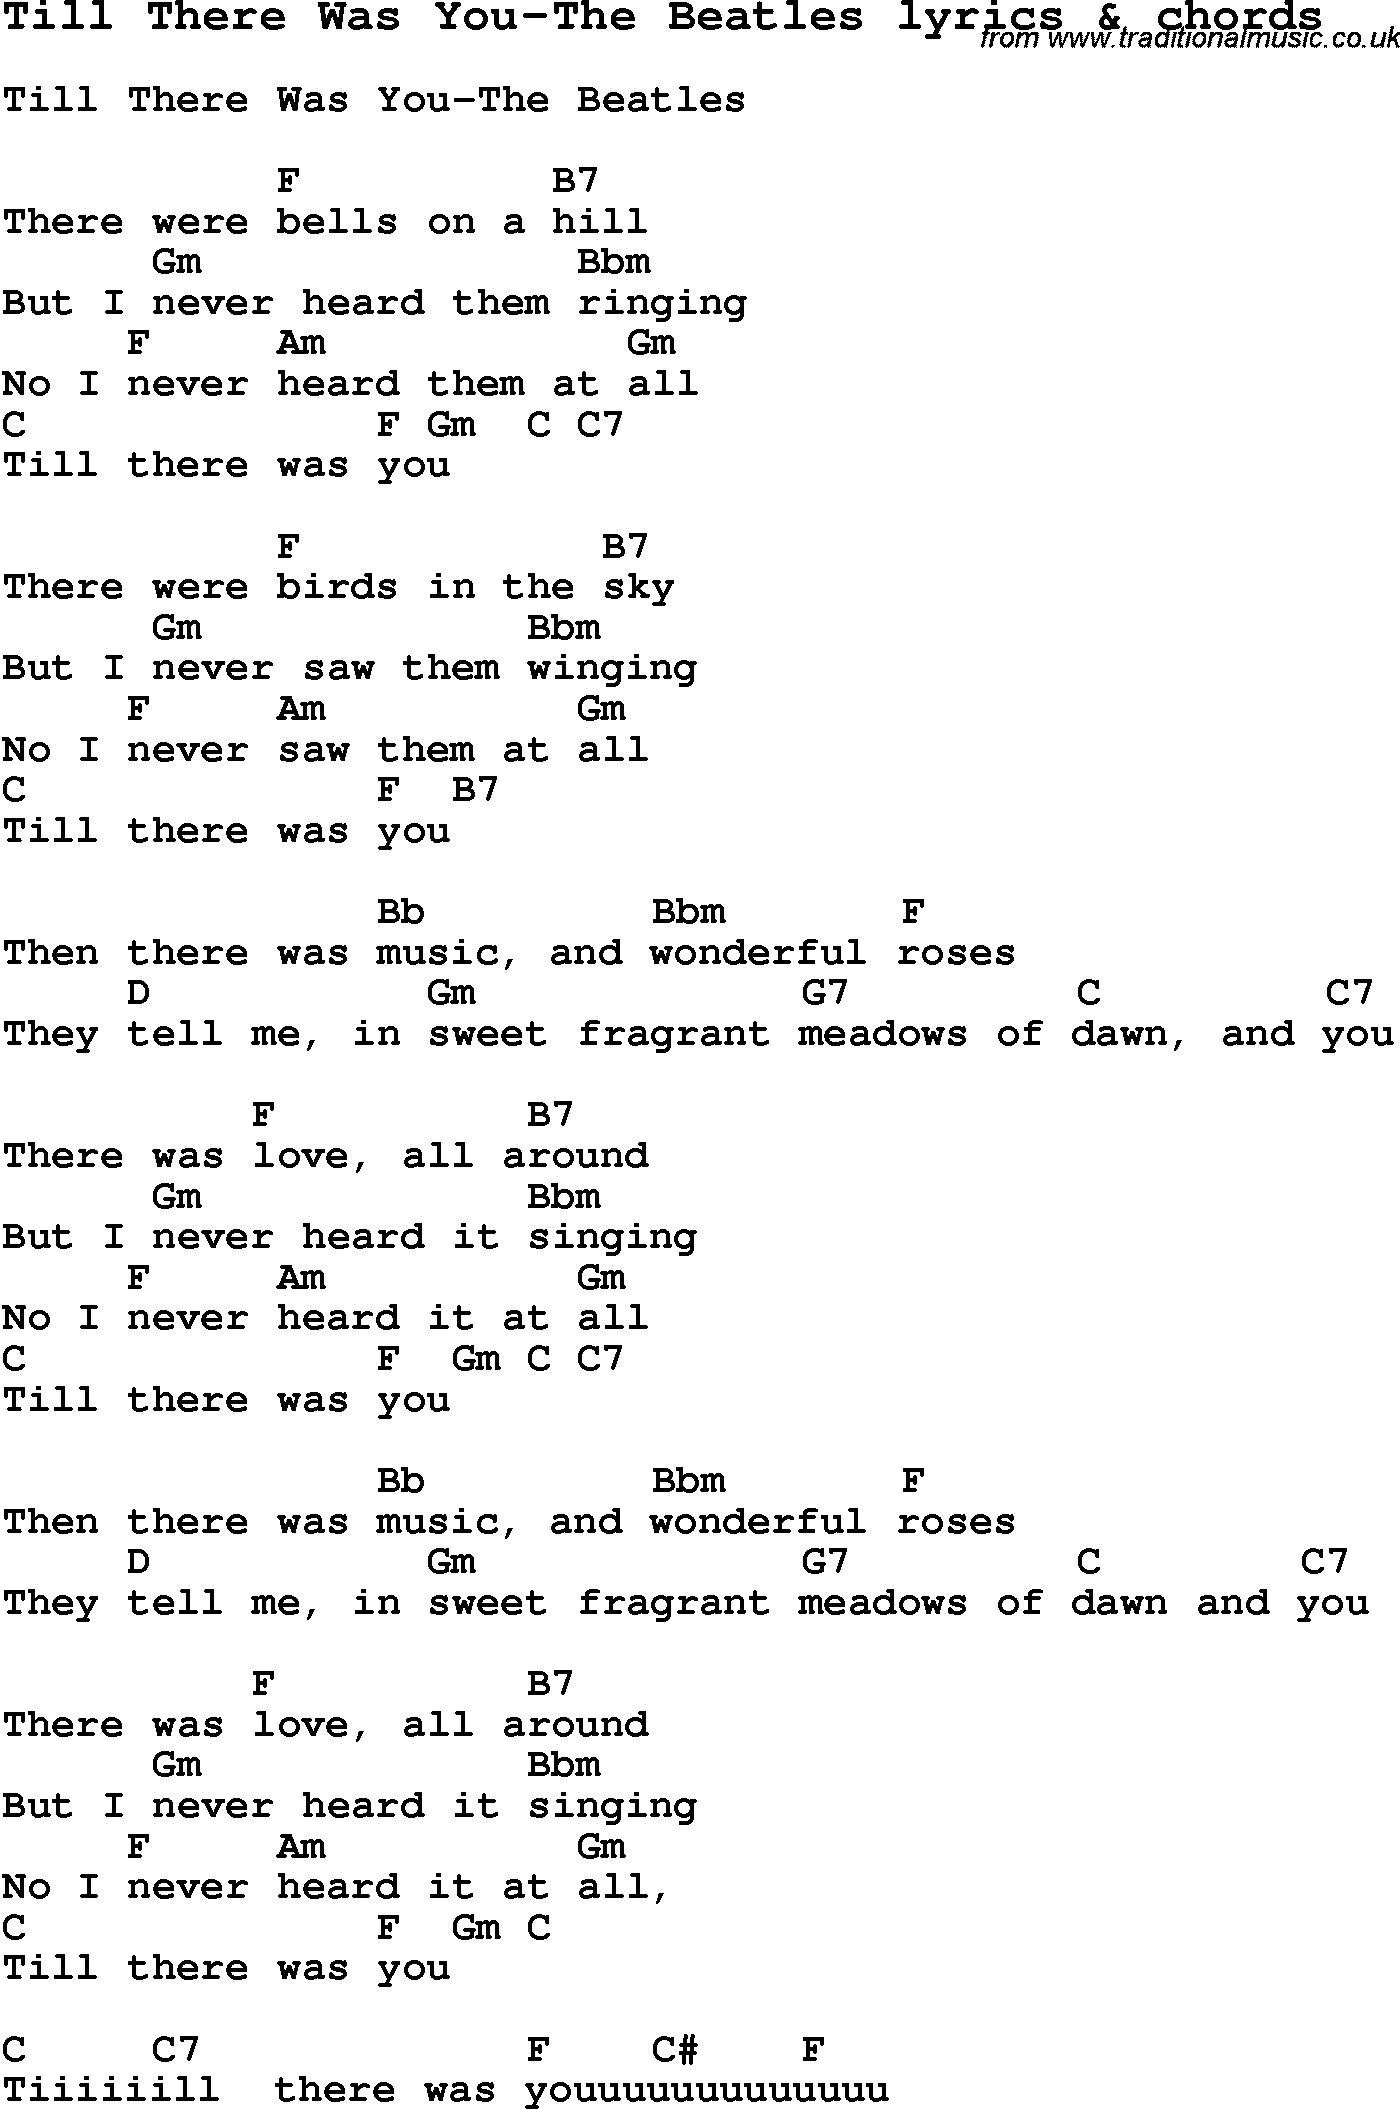 Love Song Lyrics for: Till There Was You-The Beatles with chords for Ukulele, Guitar Banjo etc.